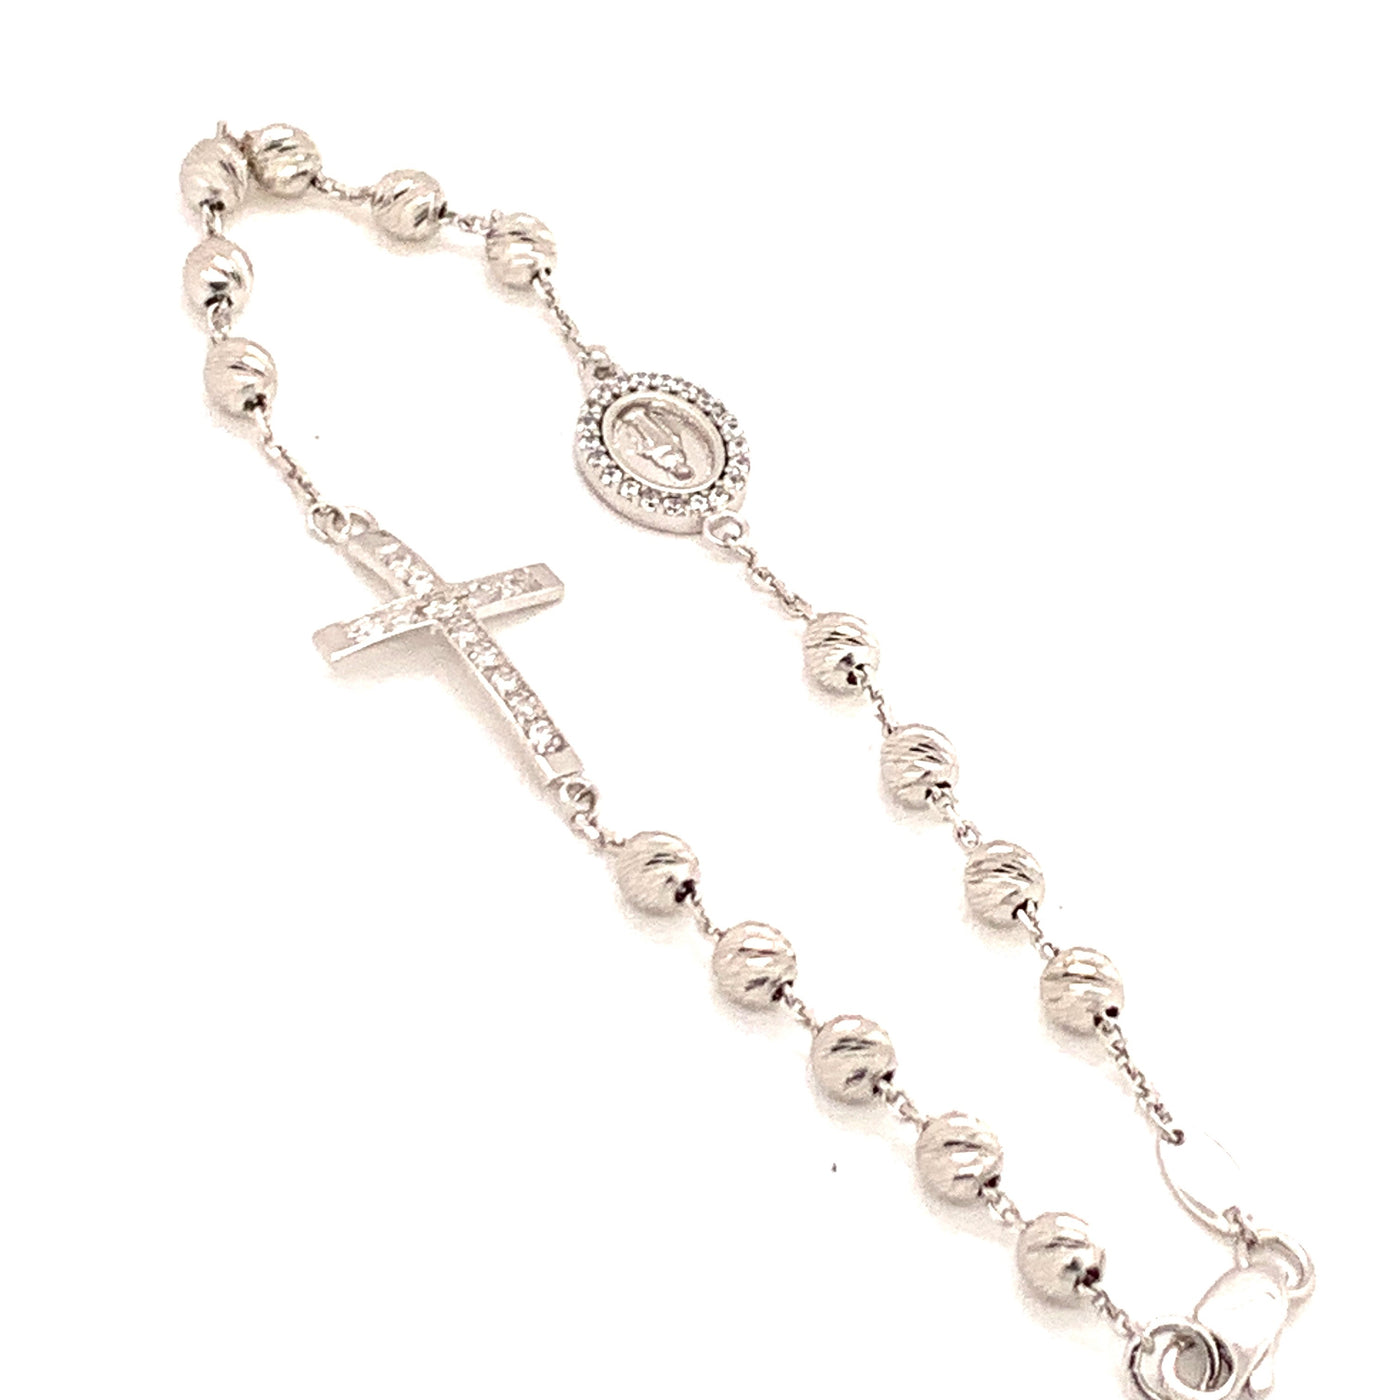 9K white gold rosary bracelet With diamond cut beads and cz set cross and mary